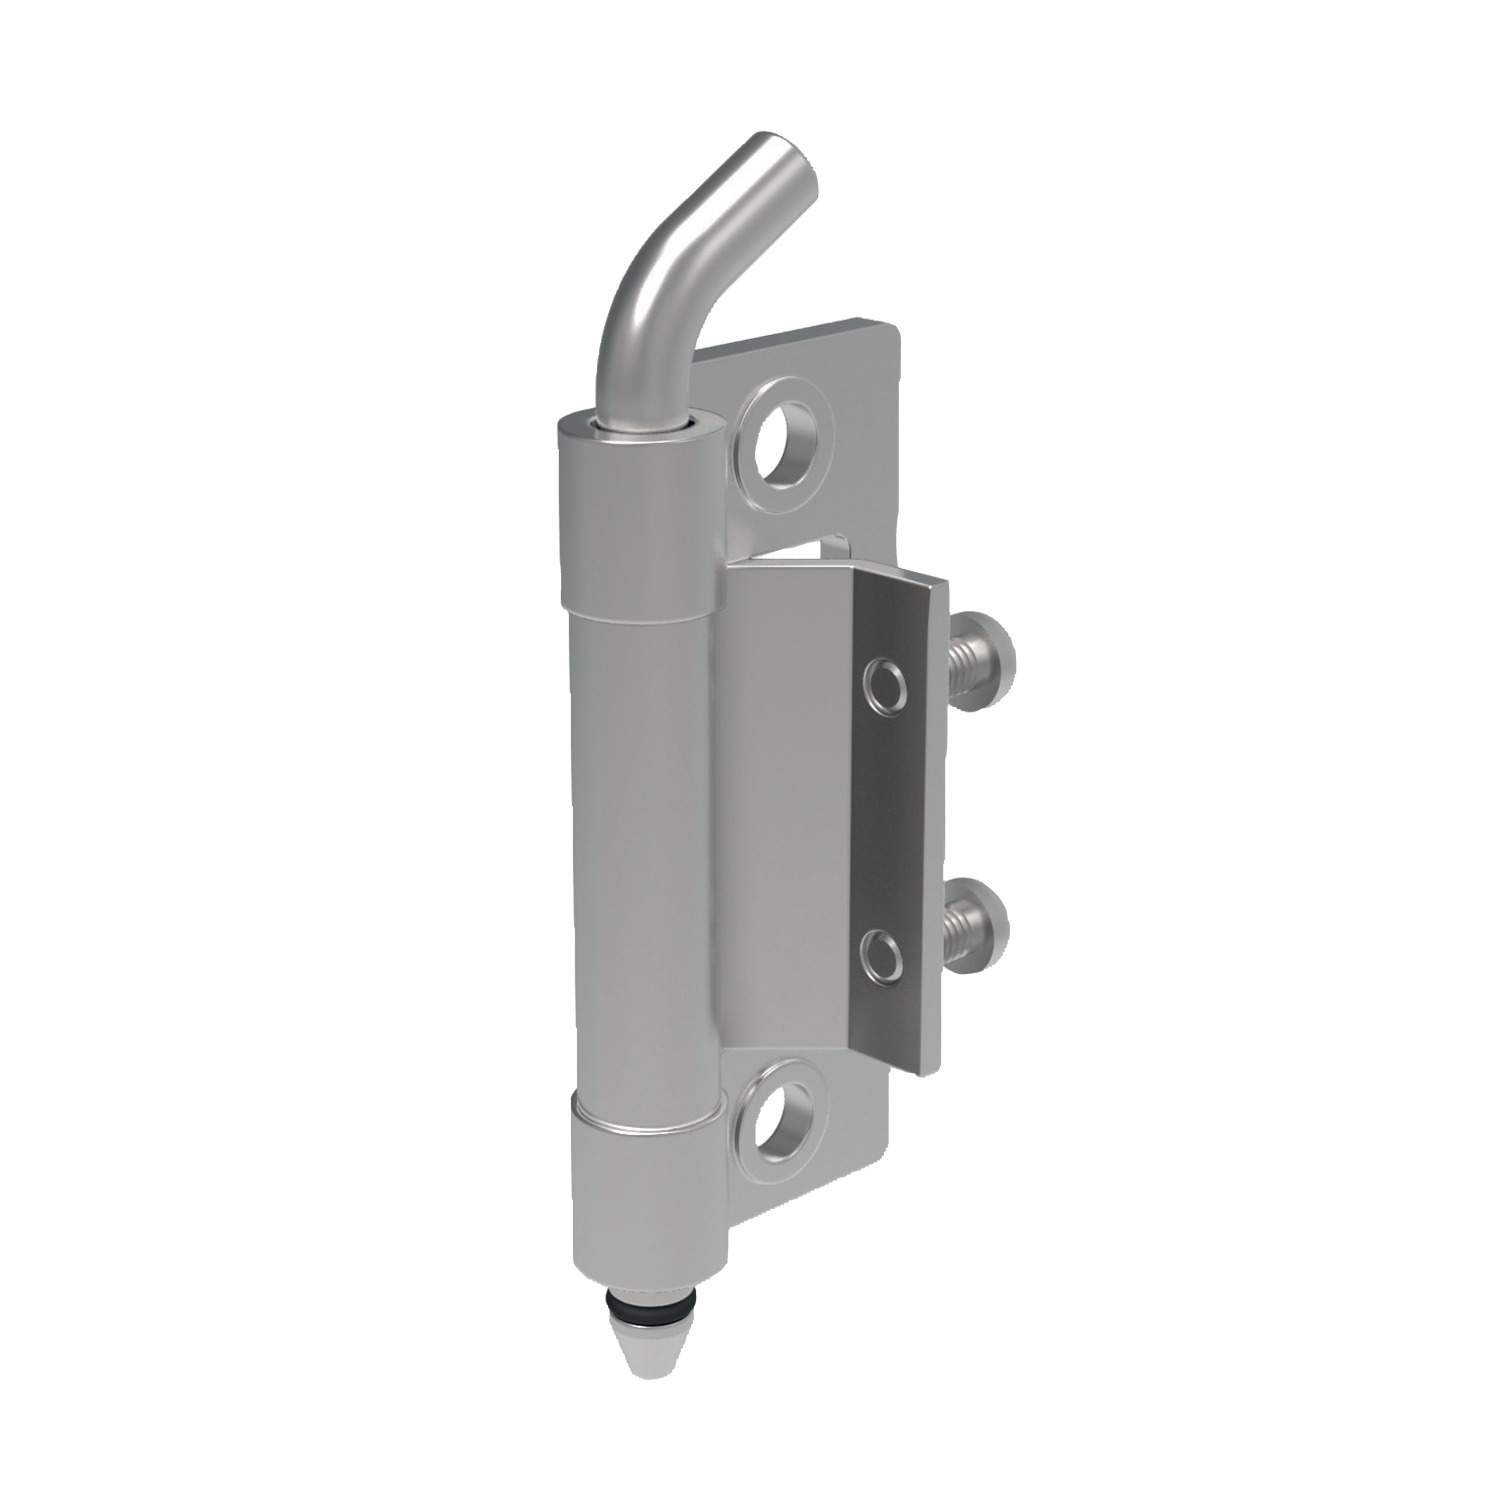 S2104.AW0020 Concealed Pivot Hinges - Lift Off 20mm door return - bolt or weld - steel. Supplied in multiples of 4